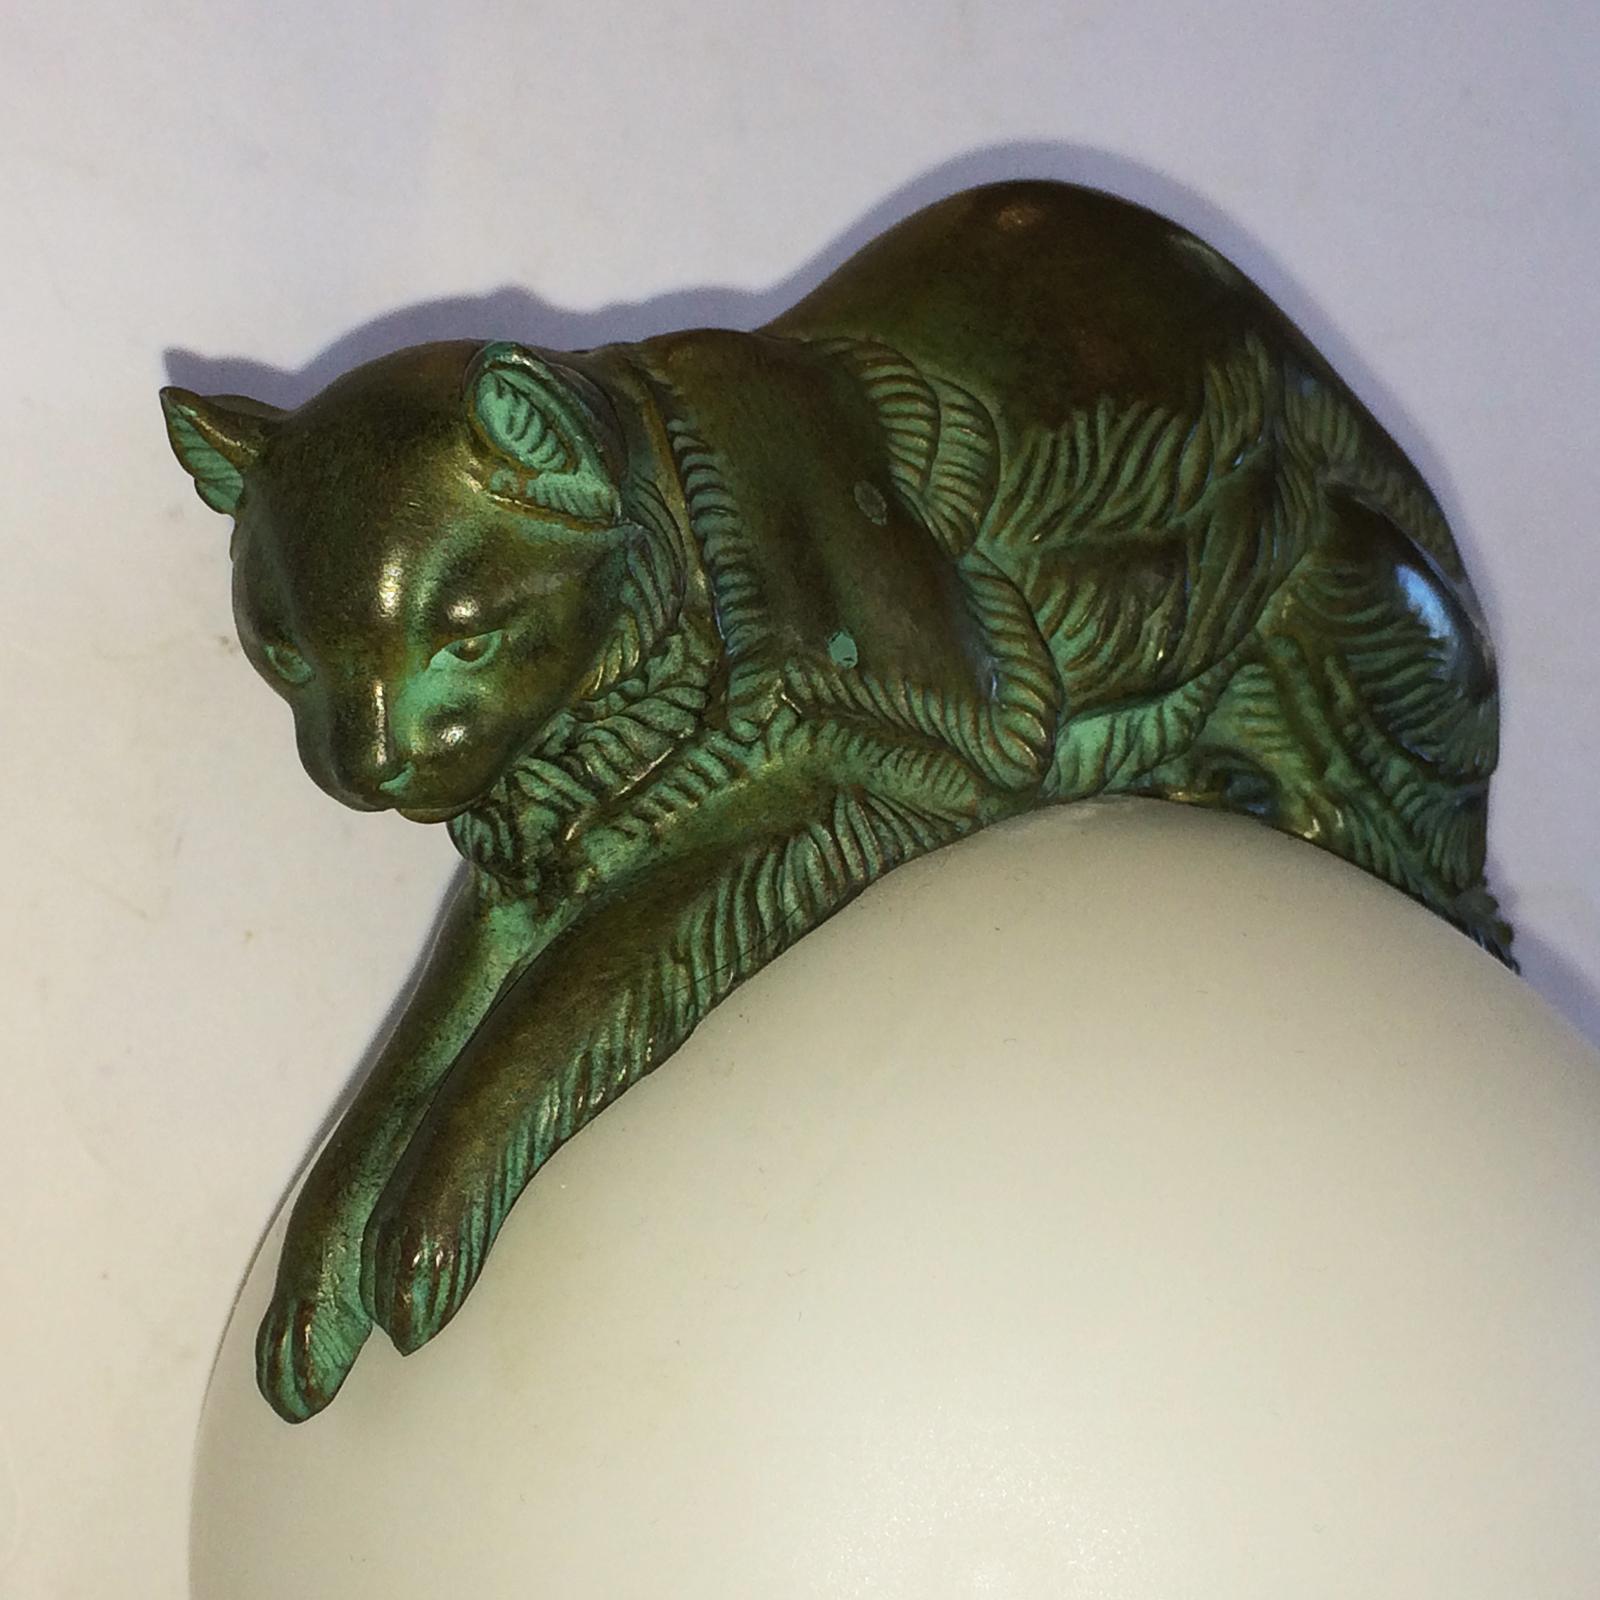 Art Deco lamp, bronze cat with verdigris finish, on white sphere by Max Le Verrier, named “Equilibre de Galliard”. Amazing design on white veined black Marble base. The design is in very fine detail and magnificent, original condition, no damage, no